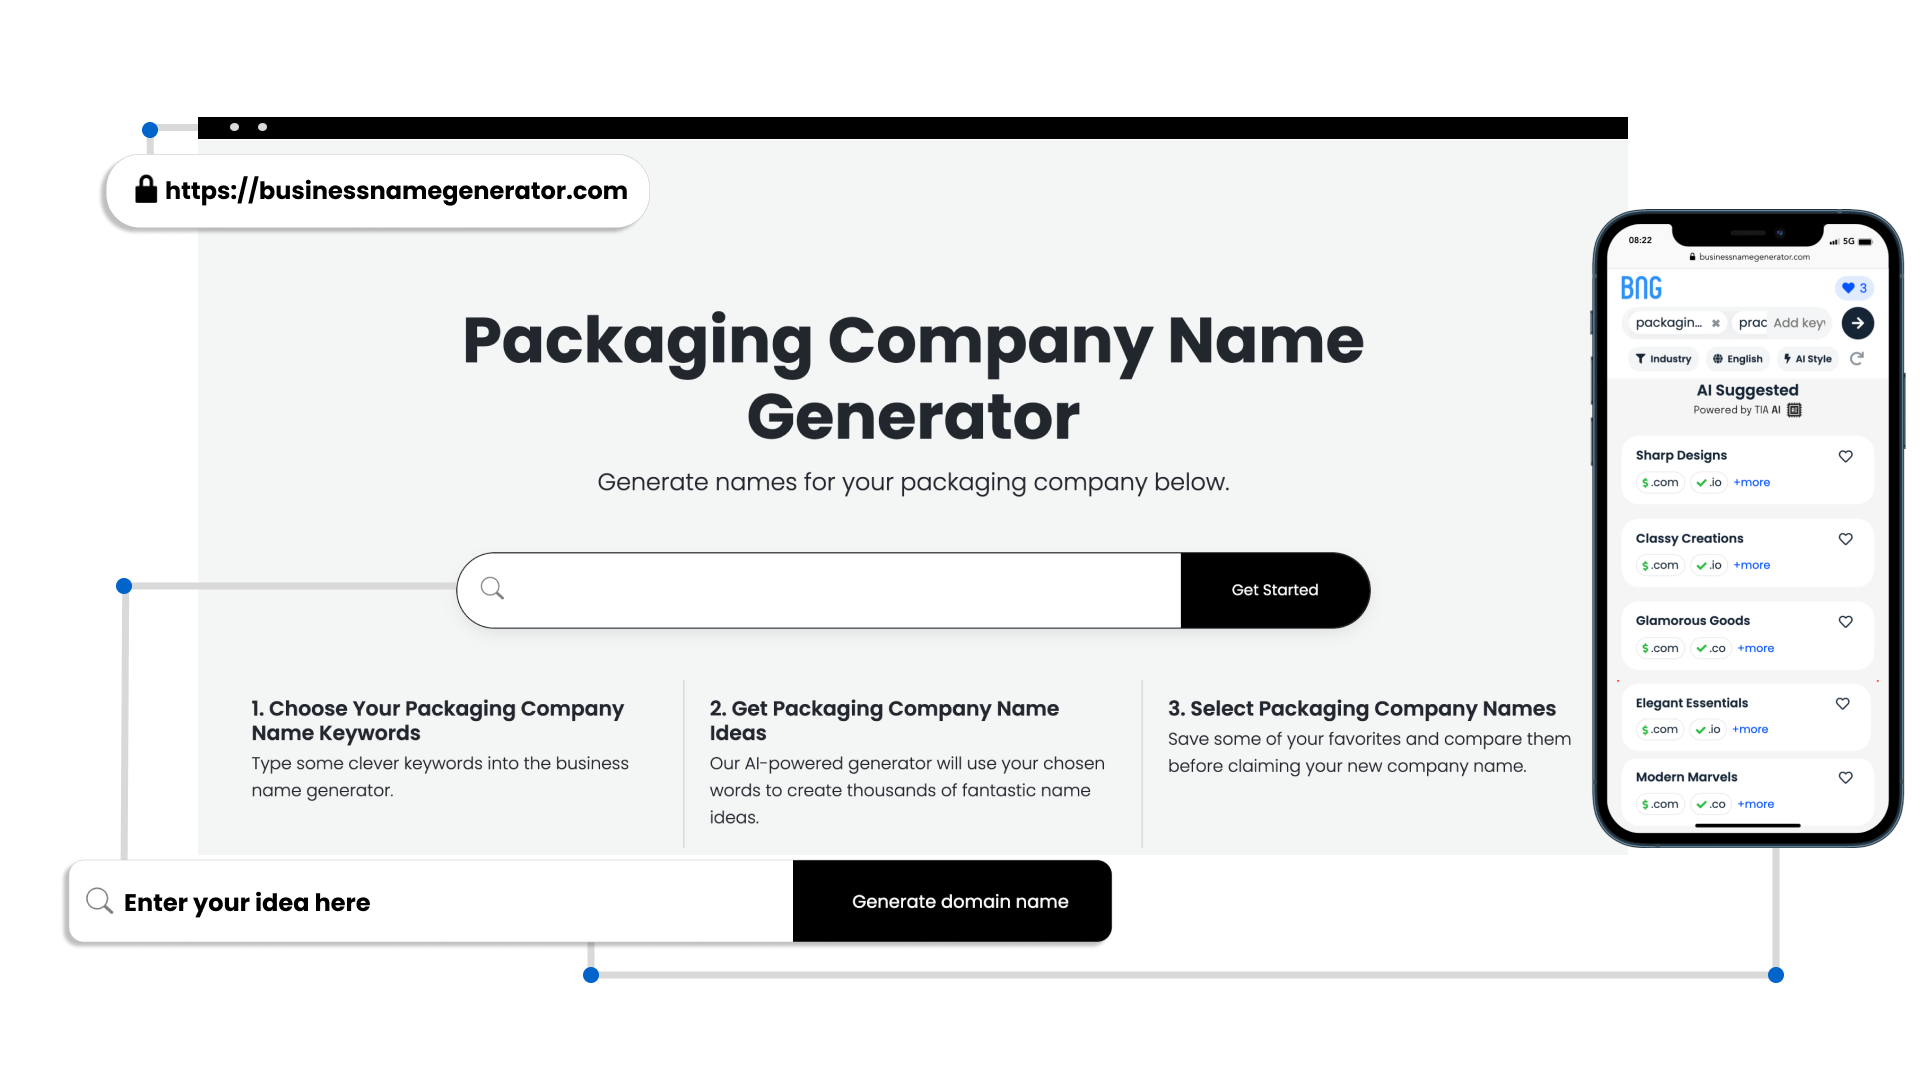 Advantages of Our Packaging Company Name Generator